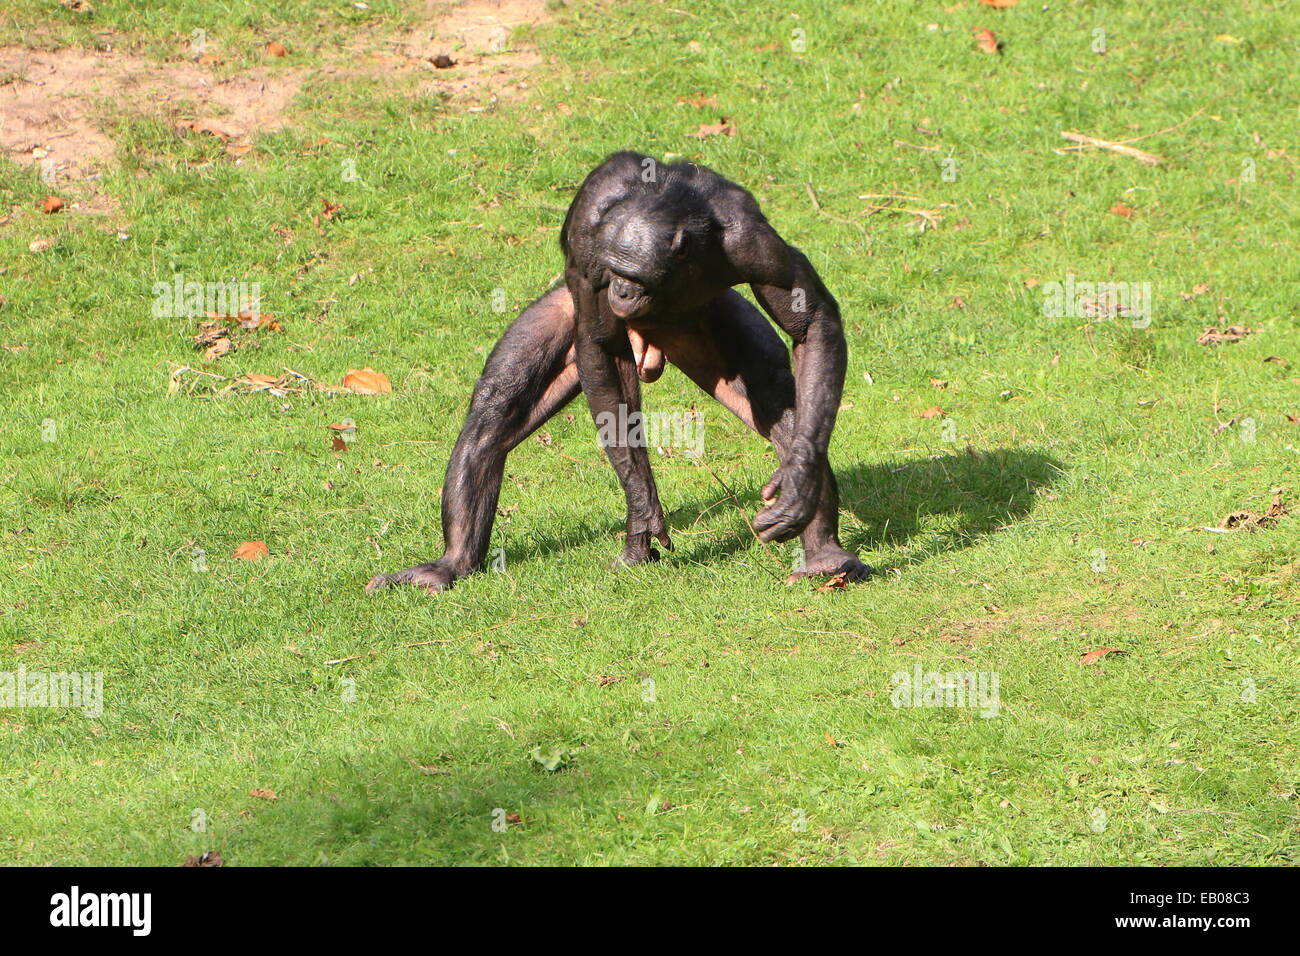 Male leader of a group of African Bonobos or Pygmy Chimpanzees (Pan Paniscus) walking  in a natural setting Stock Photo